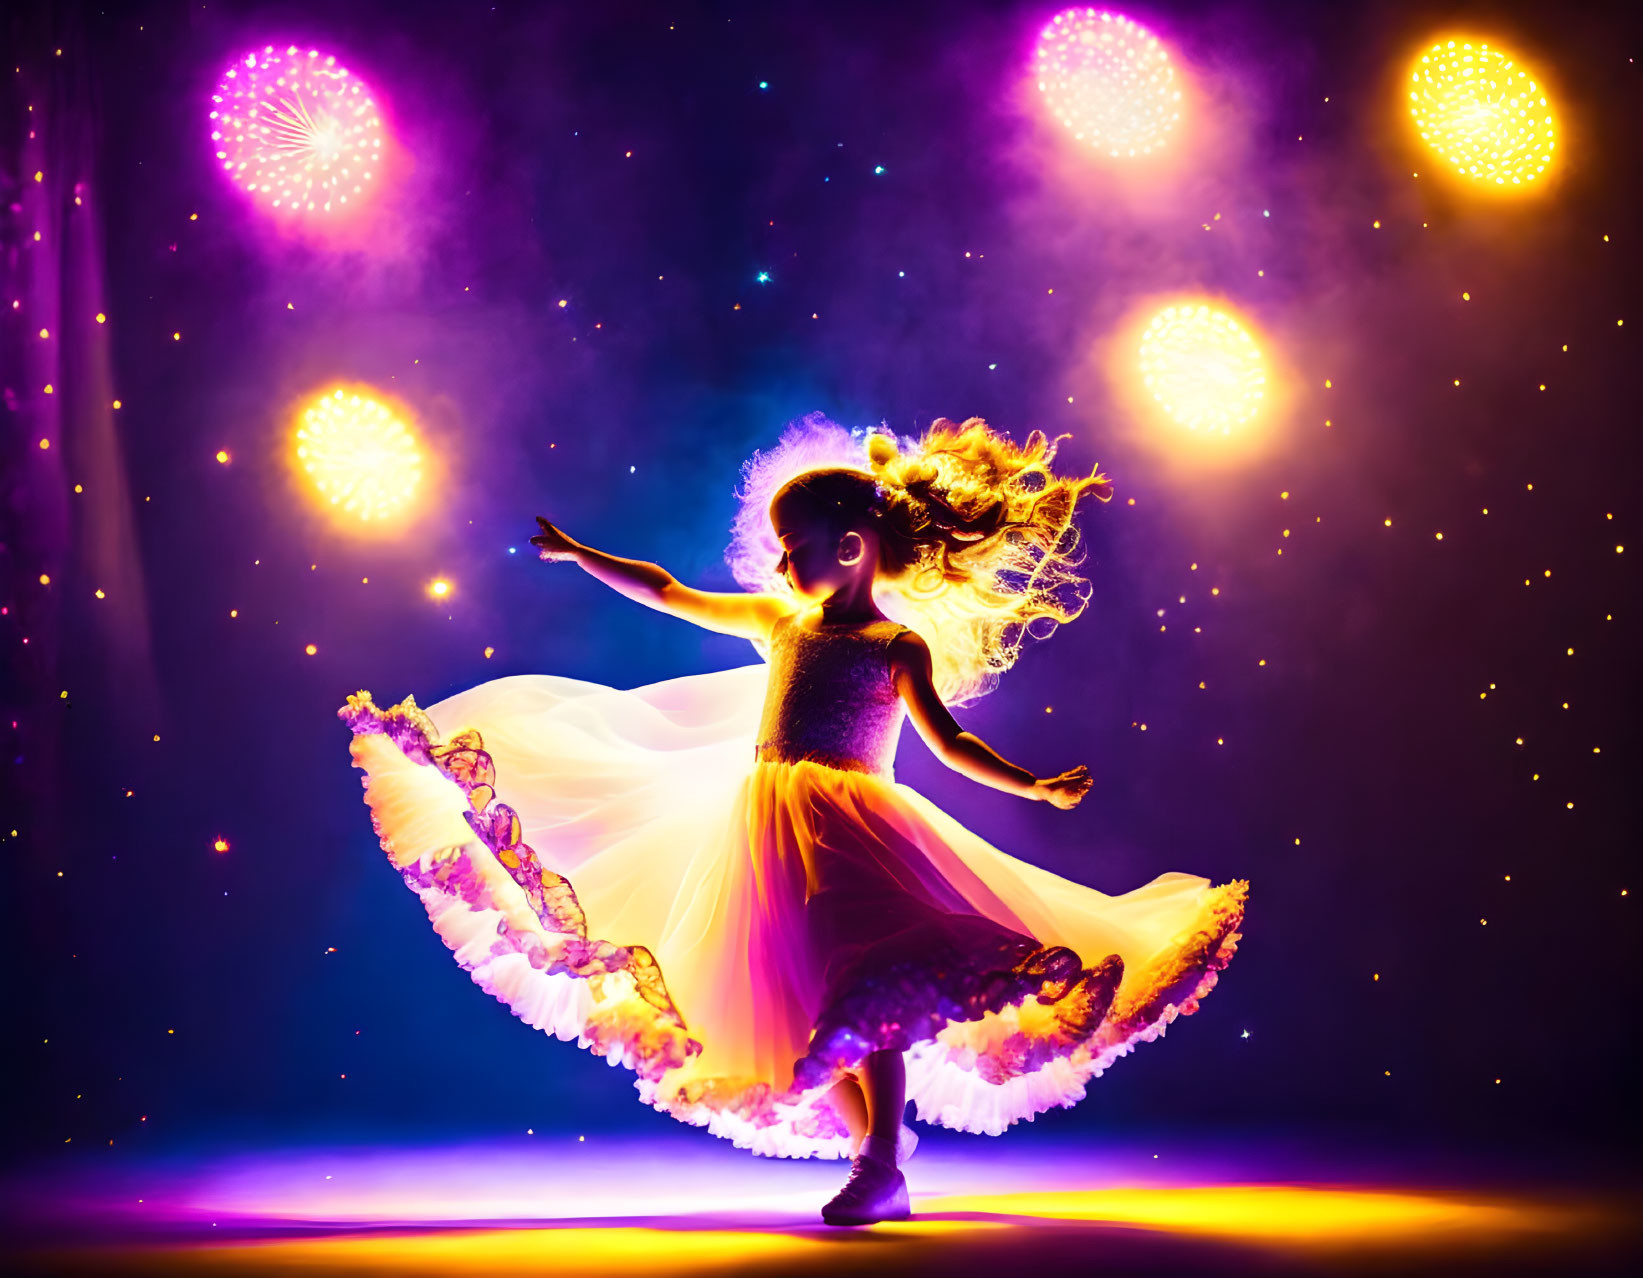 Young girl twirling in flowy dress amidst vibrant orbs and fireworks